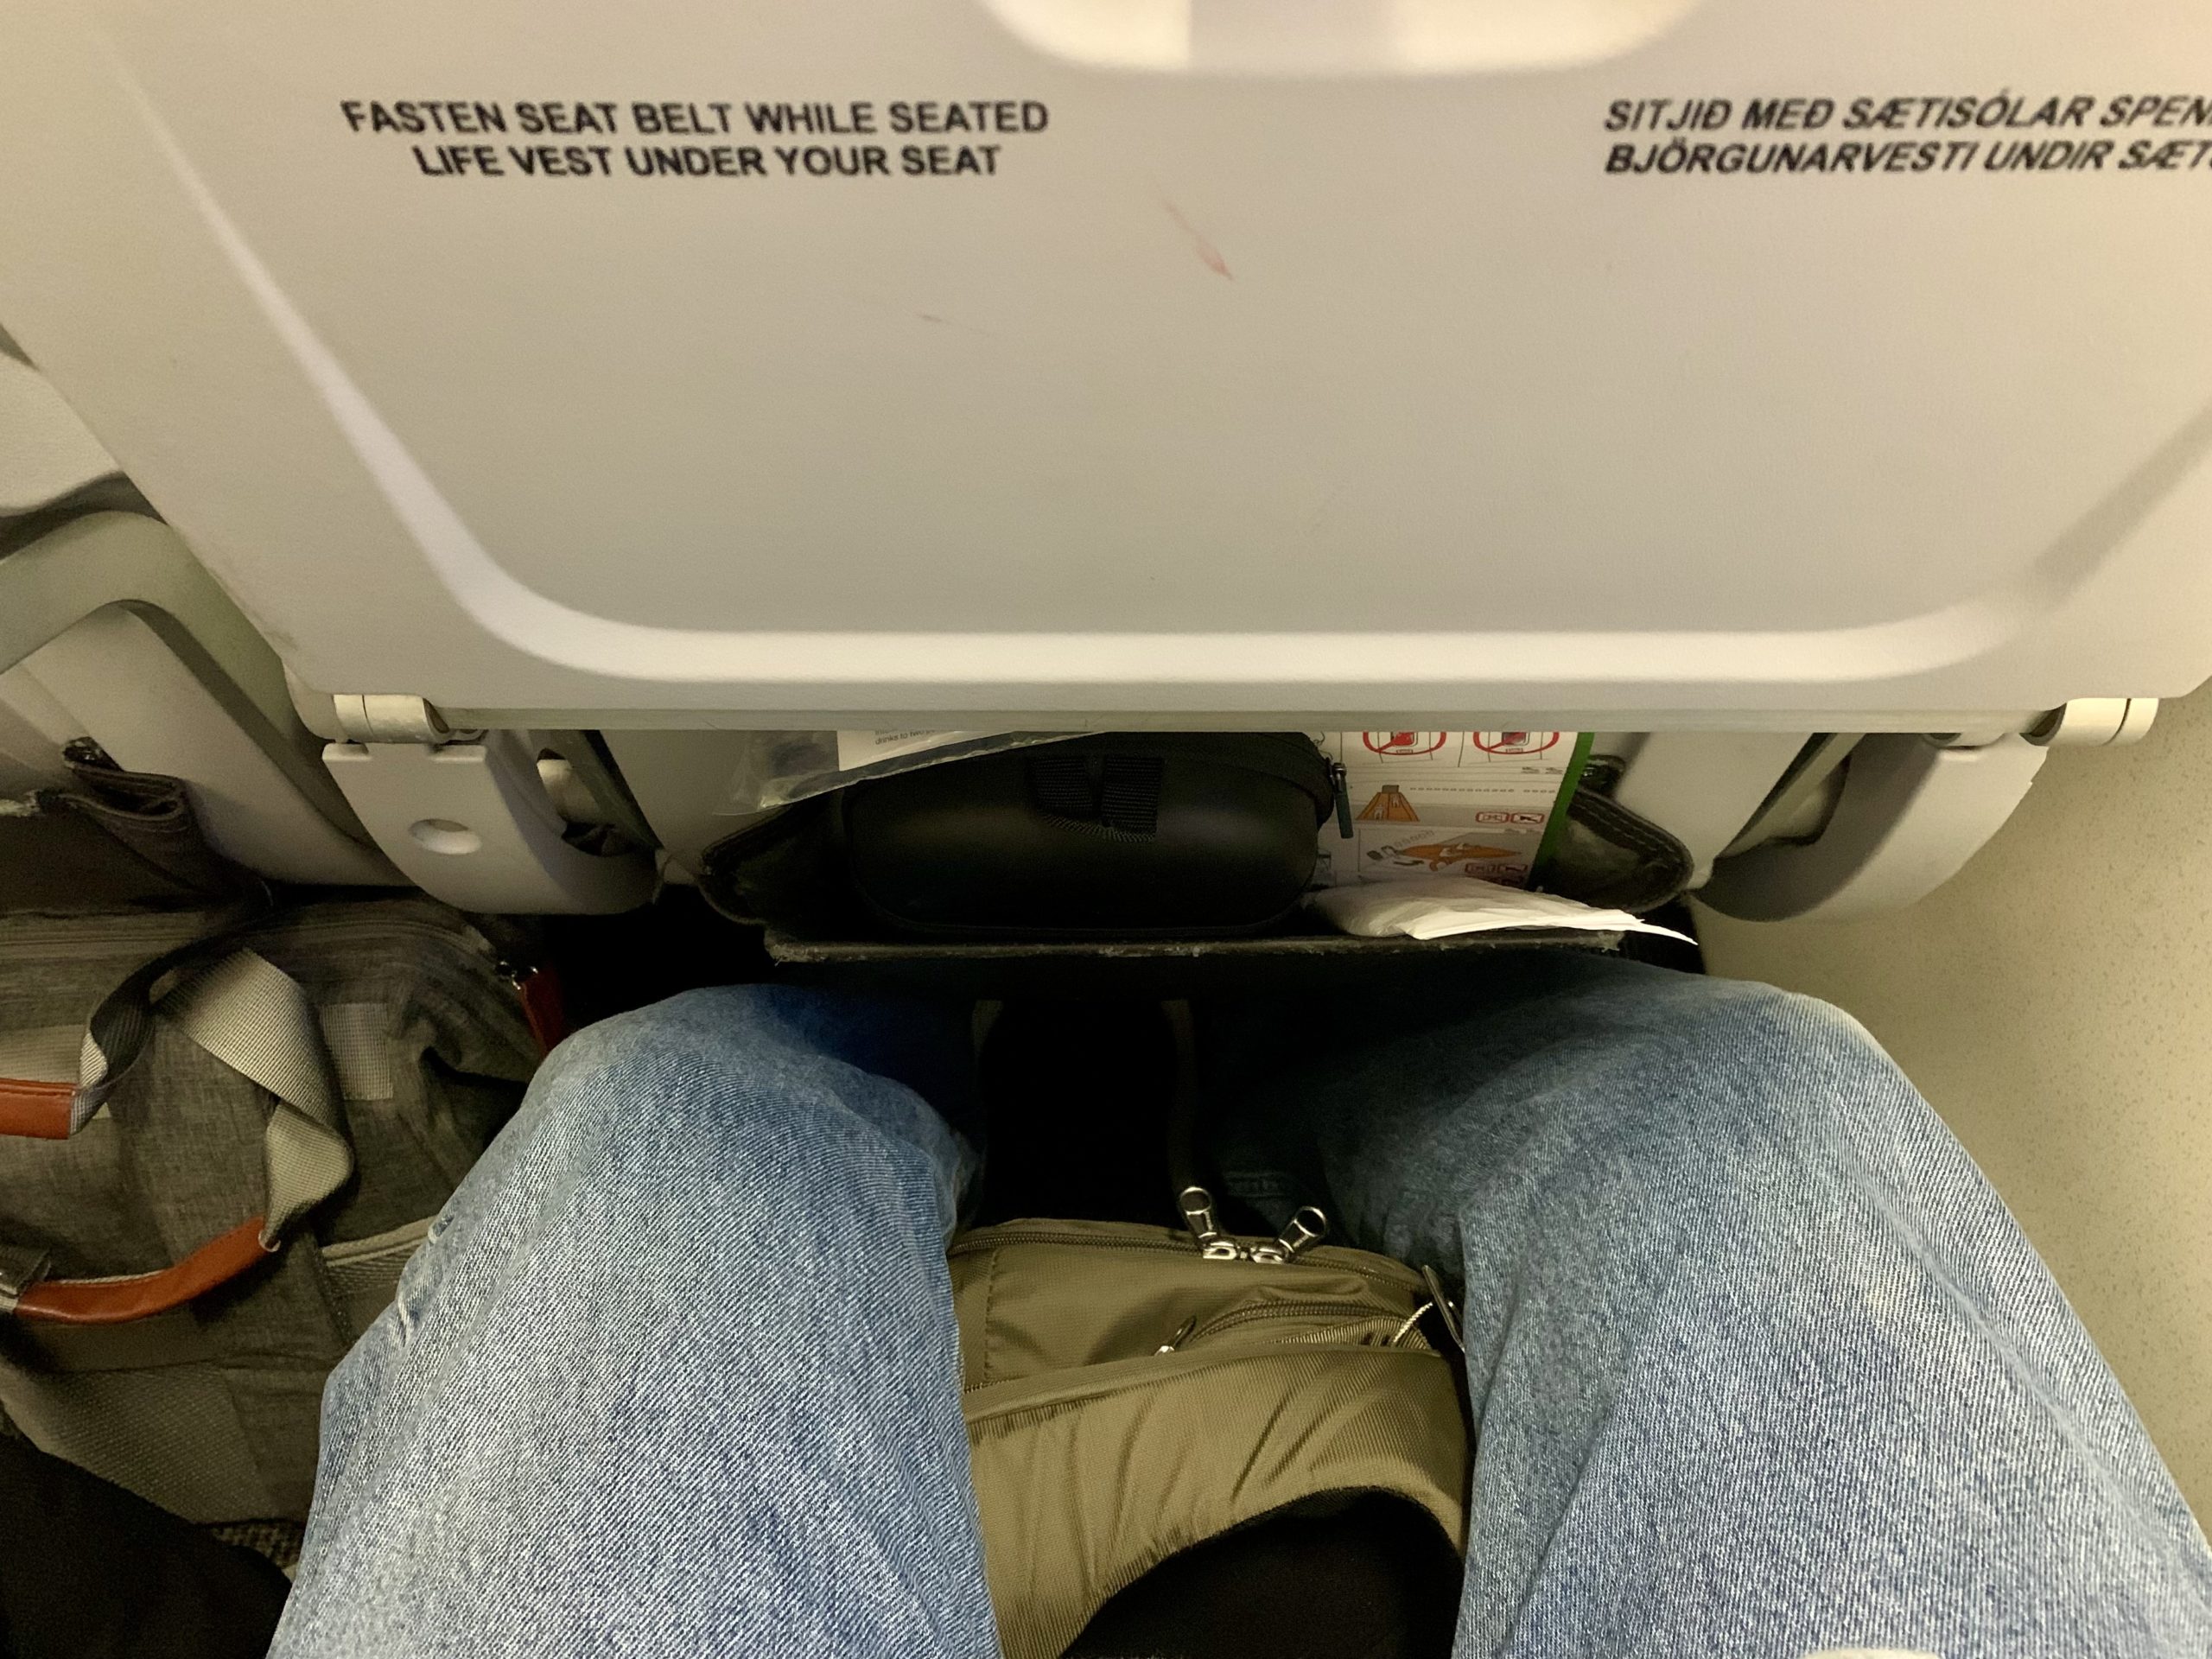 a person's legs under an airplane seat